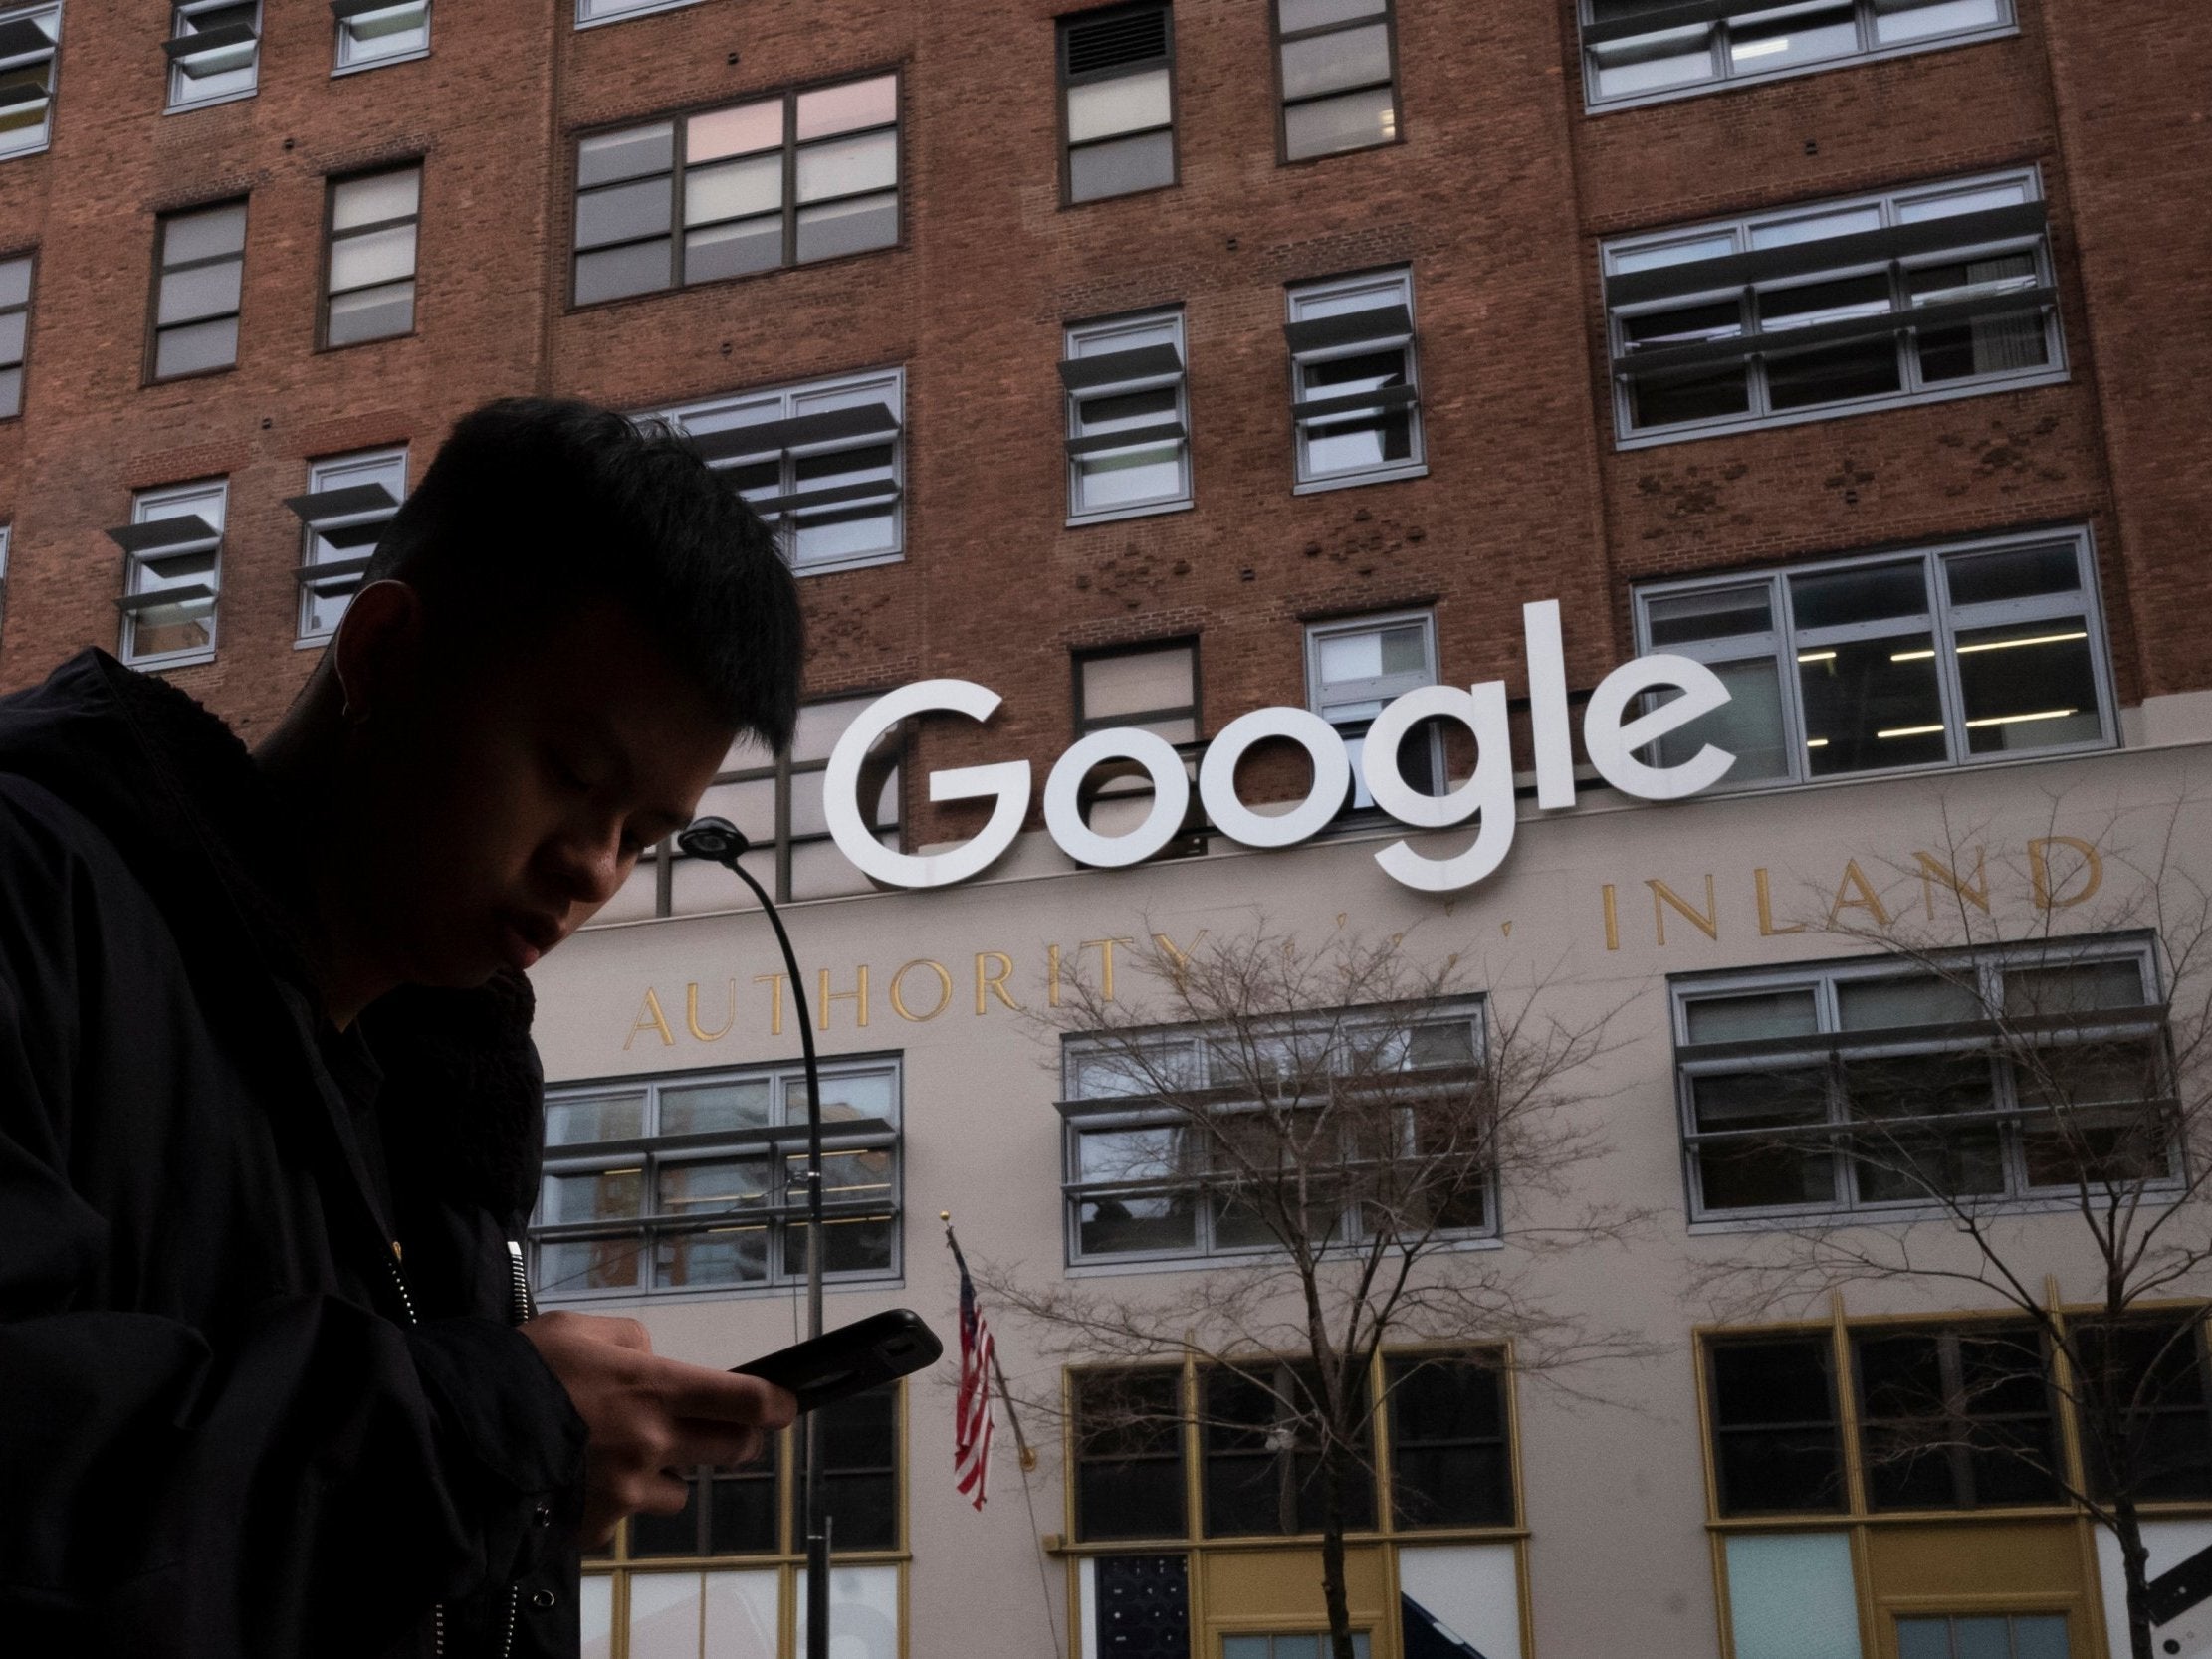 Google has come under fire for its privacy policies before